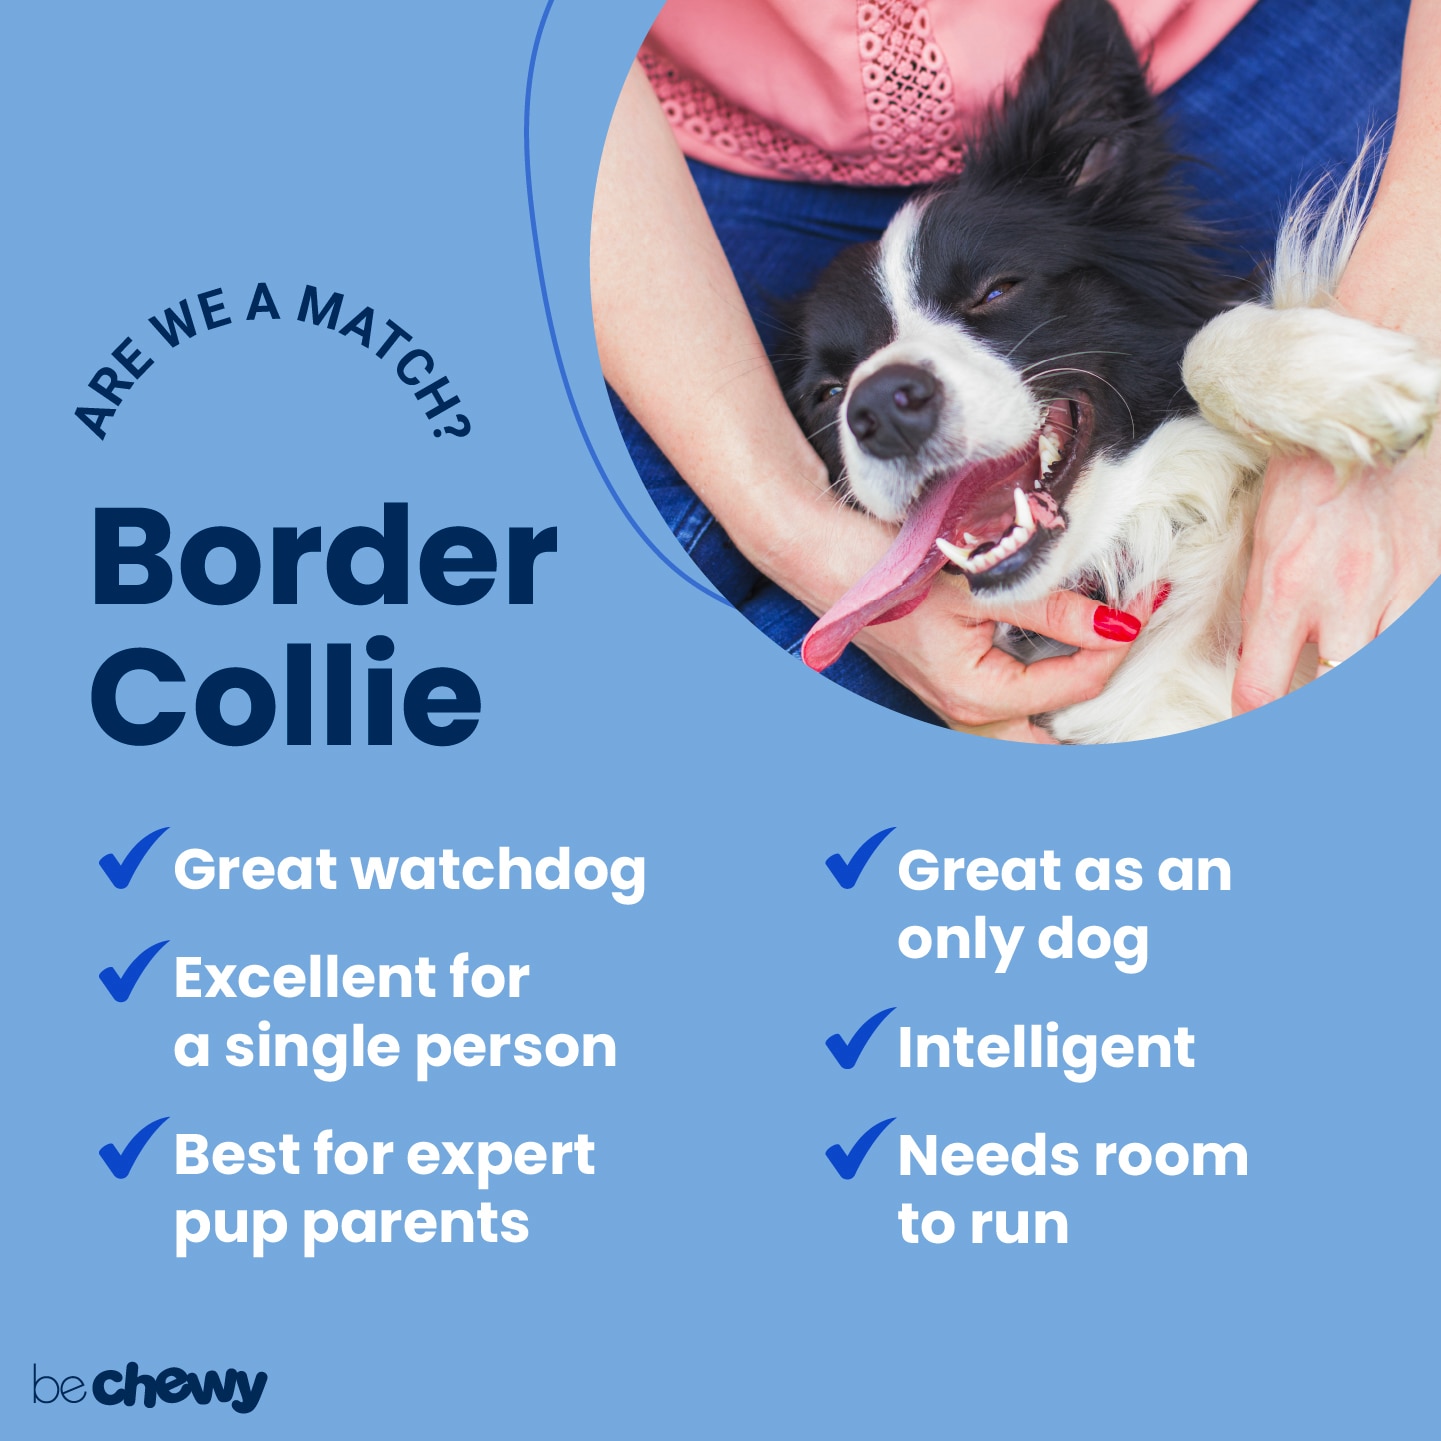 Border Collie Dog | Images, Temperament And Information  